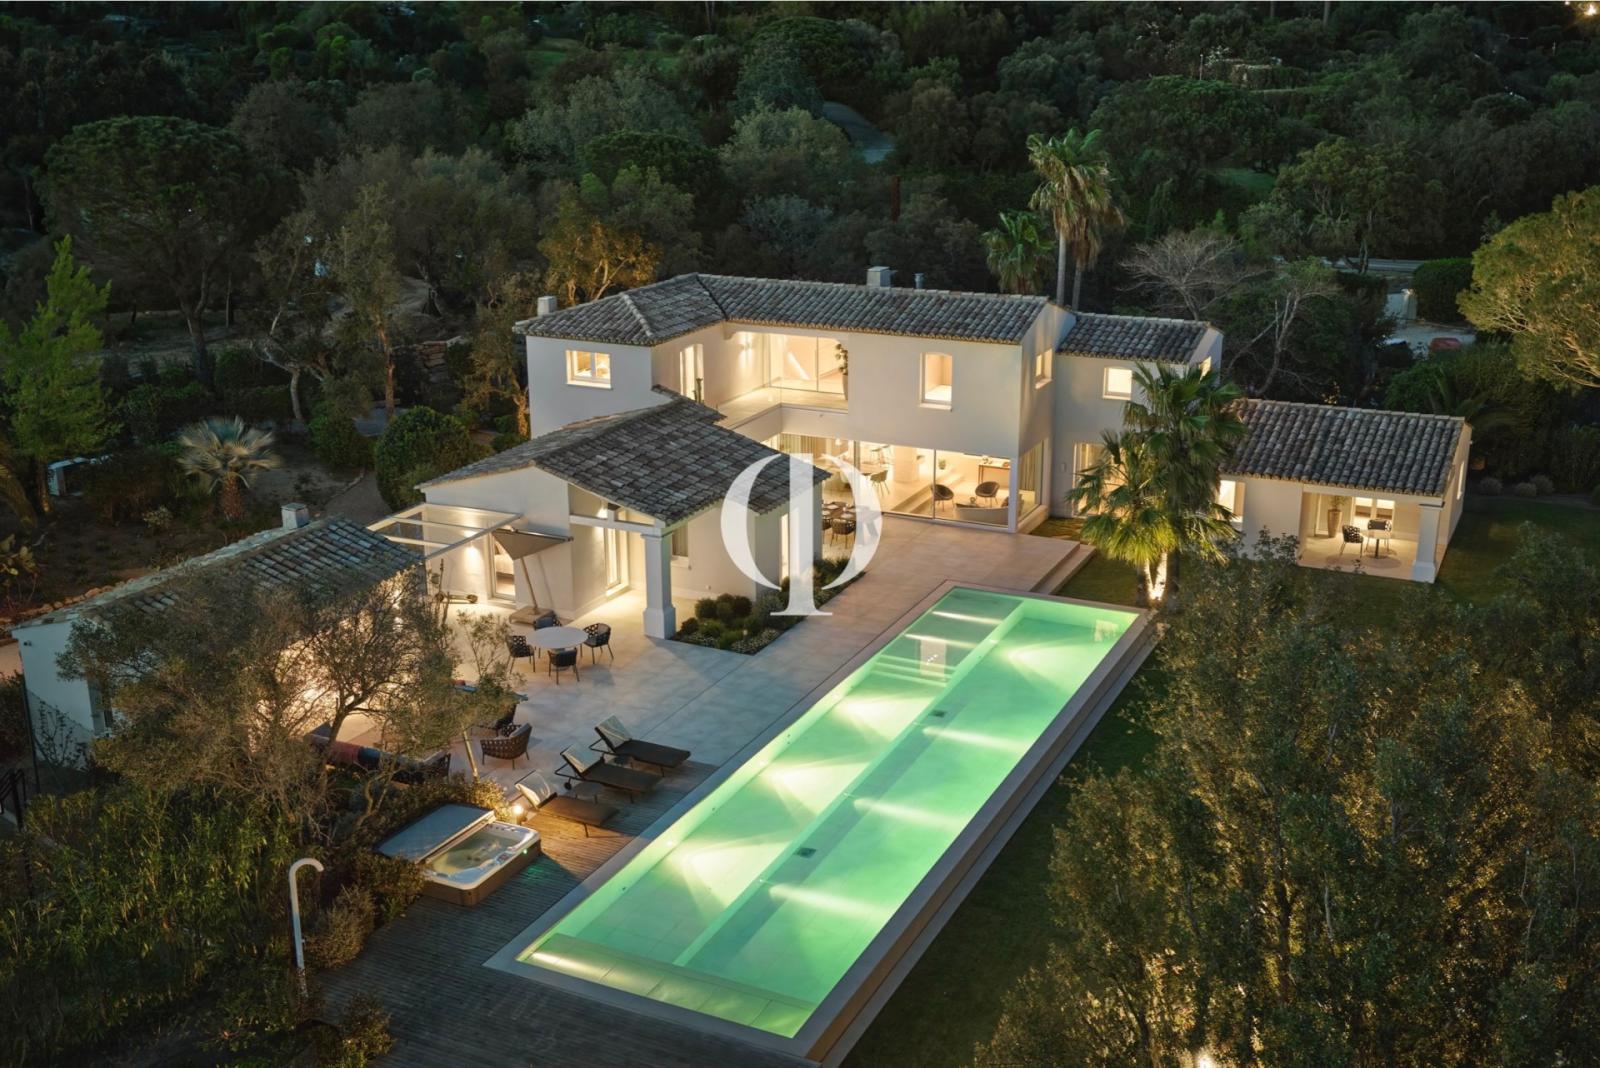 Property for sale. An the heart of one of the most prestigious areas of Grimaud, luxurious...